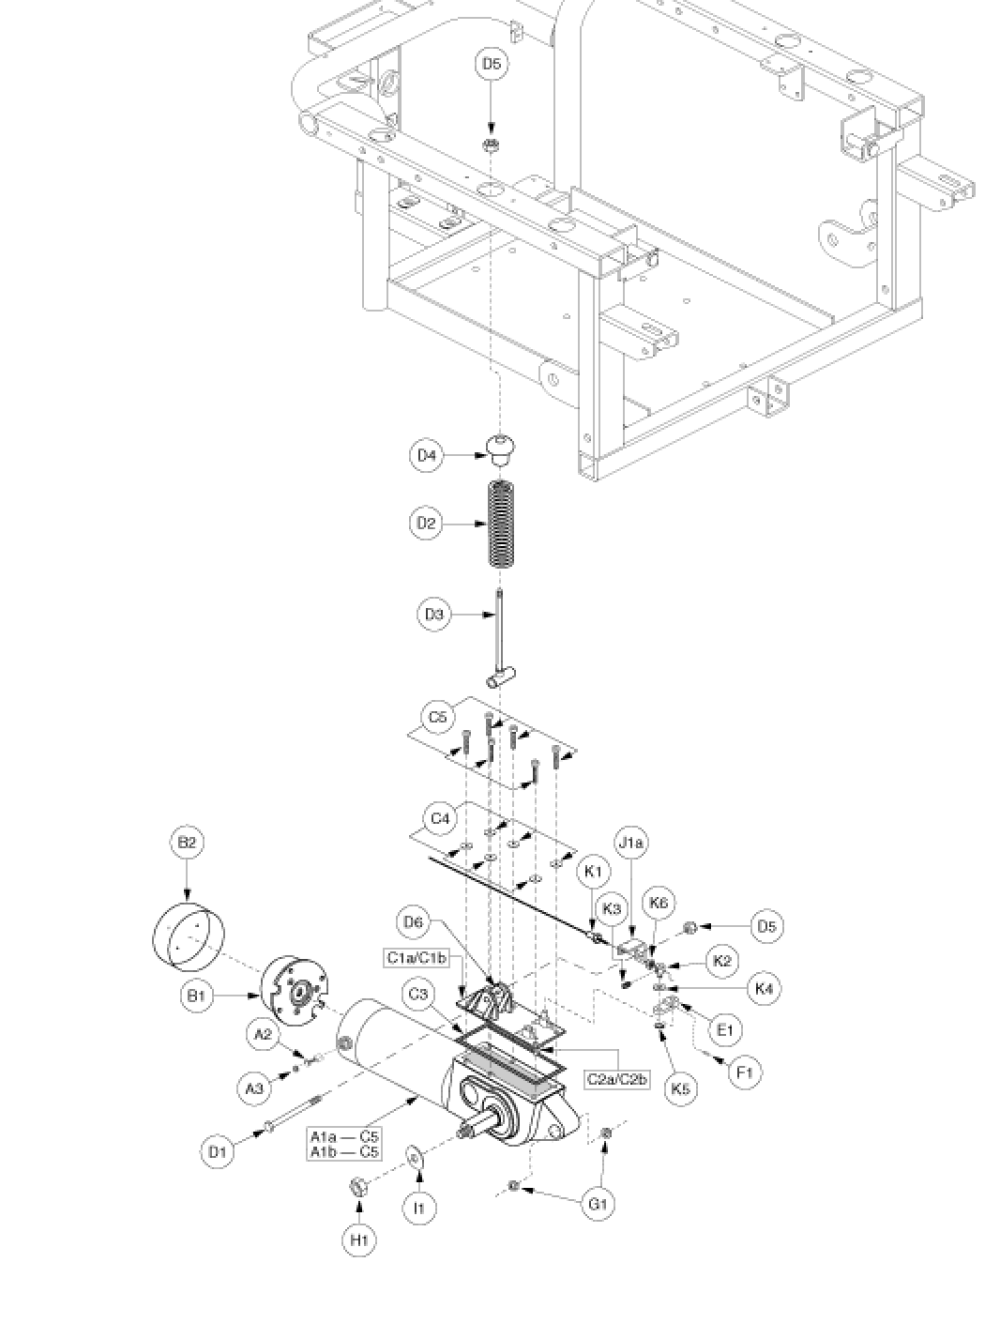 Drive Assembly - E675 High Speed, Gen. 2 parts diagram